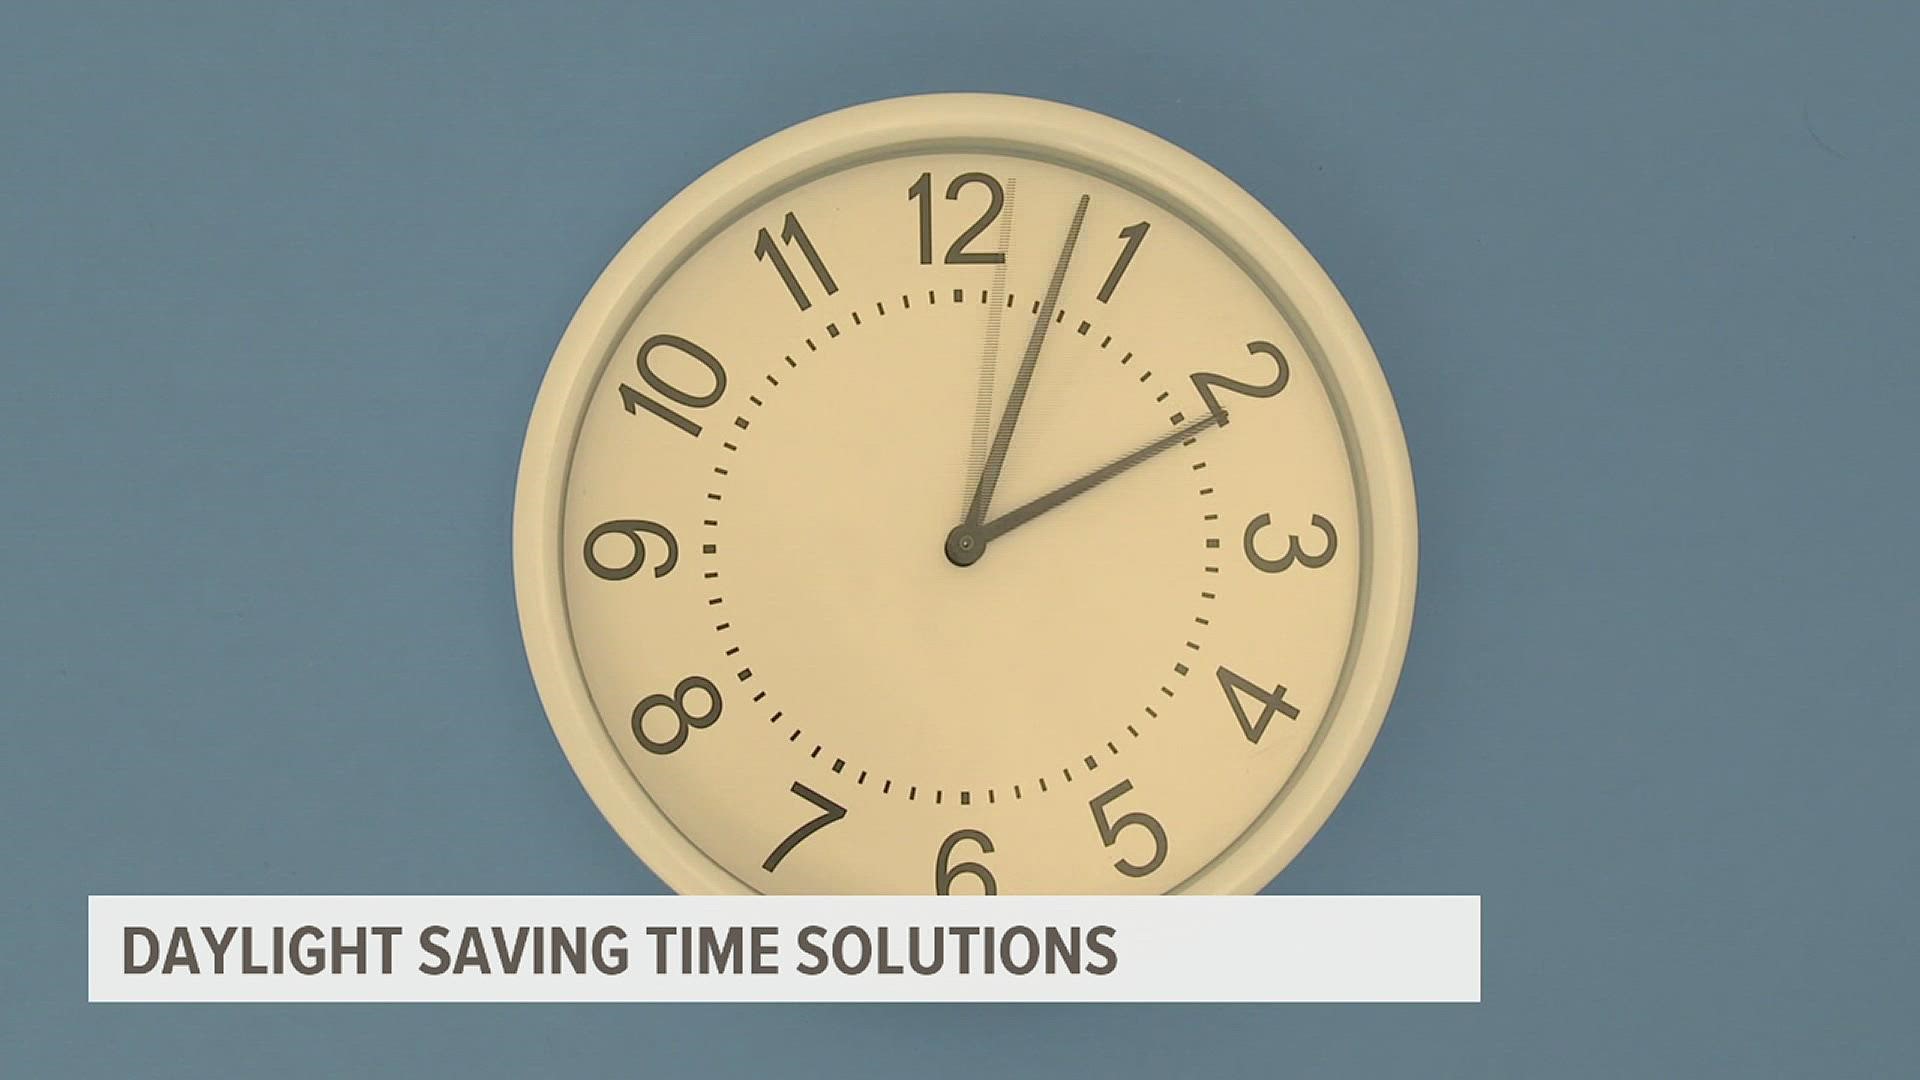 Many say the biannual resetting of clocks does more harm than good.